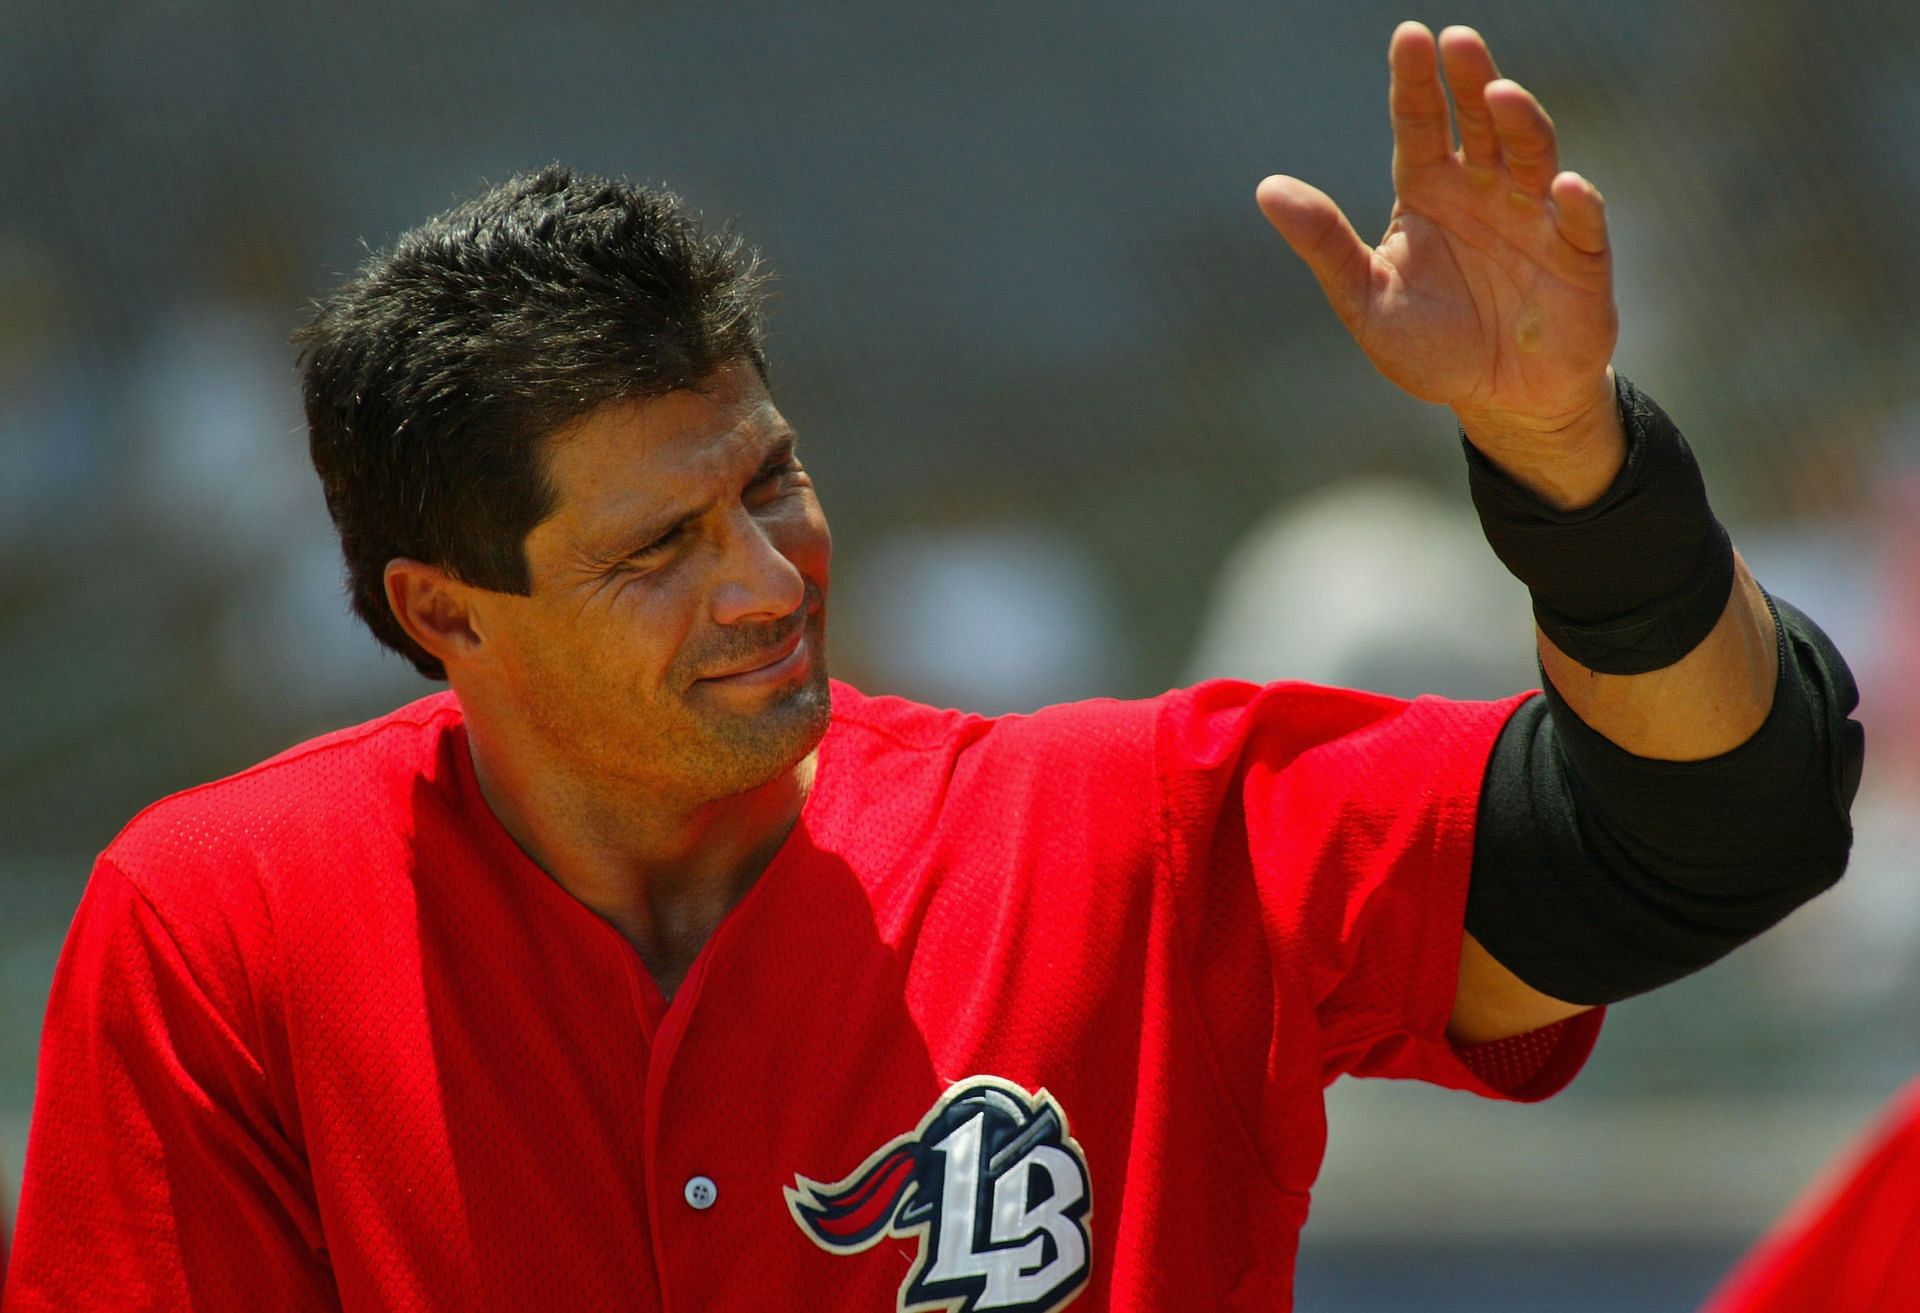 Jose Canseco promised his mom on her deathbed.